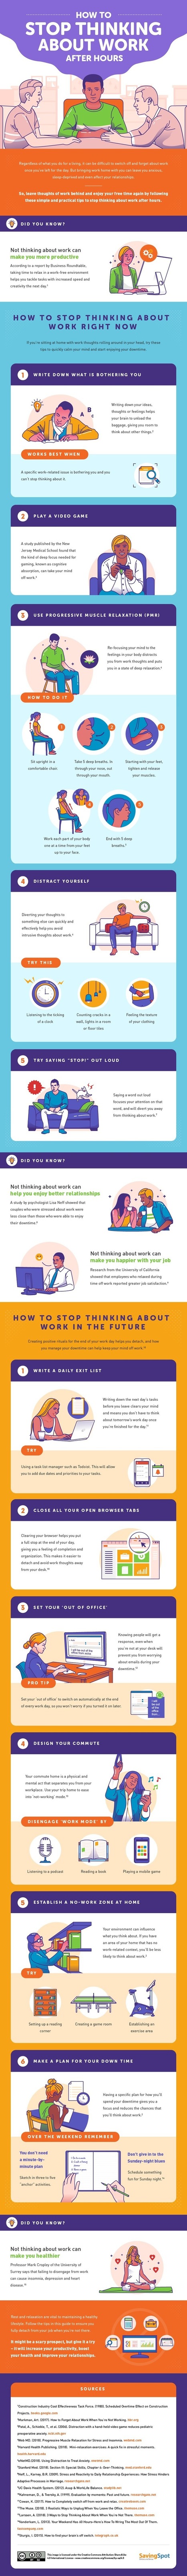 How to switch off your work brain after hours (infographic) via @digitaliworld | Daily Magazine | Scoop.it